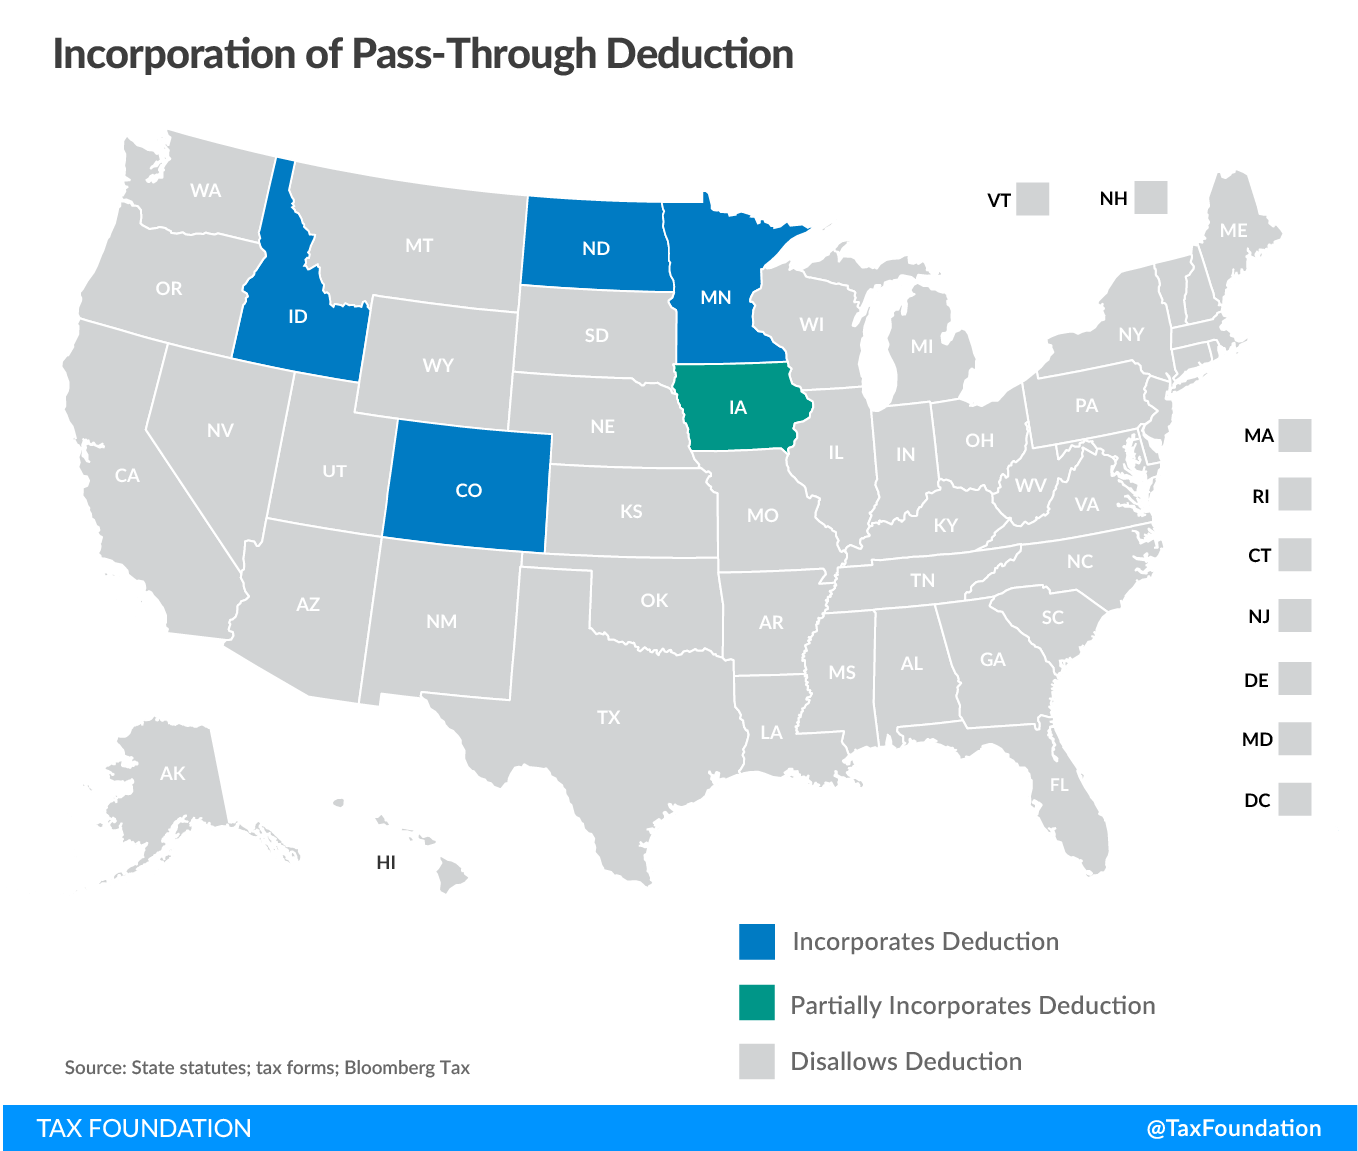 Small business expensing and pass-through deduction state tax conformity post-TCJA